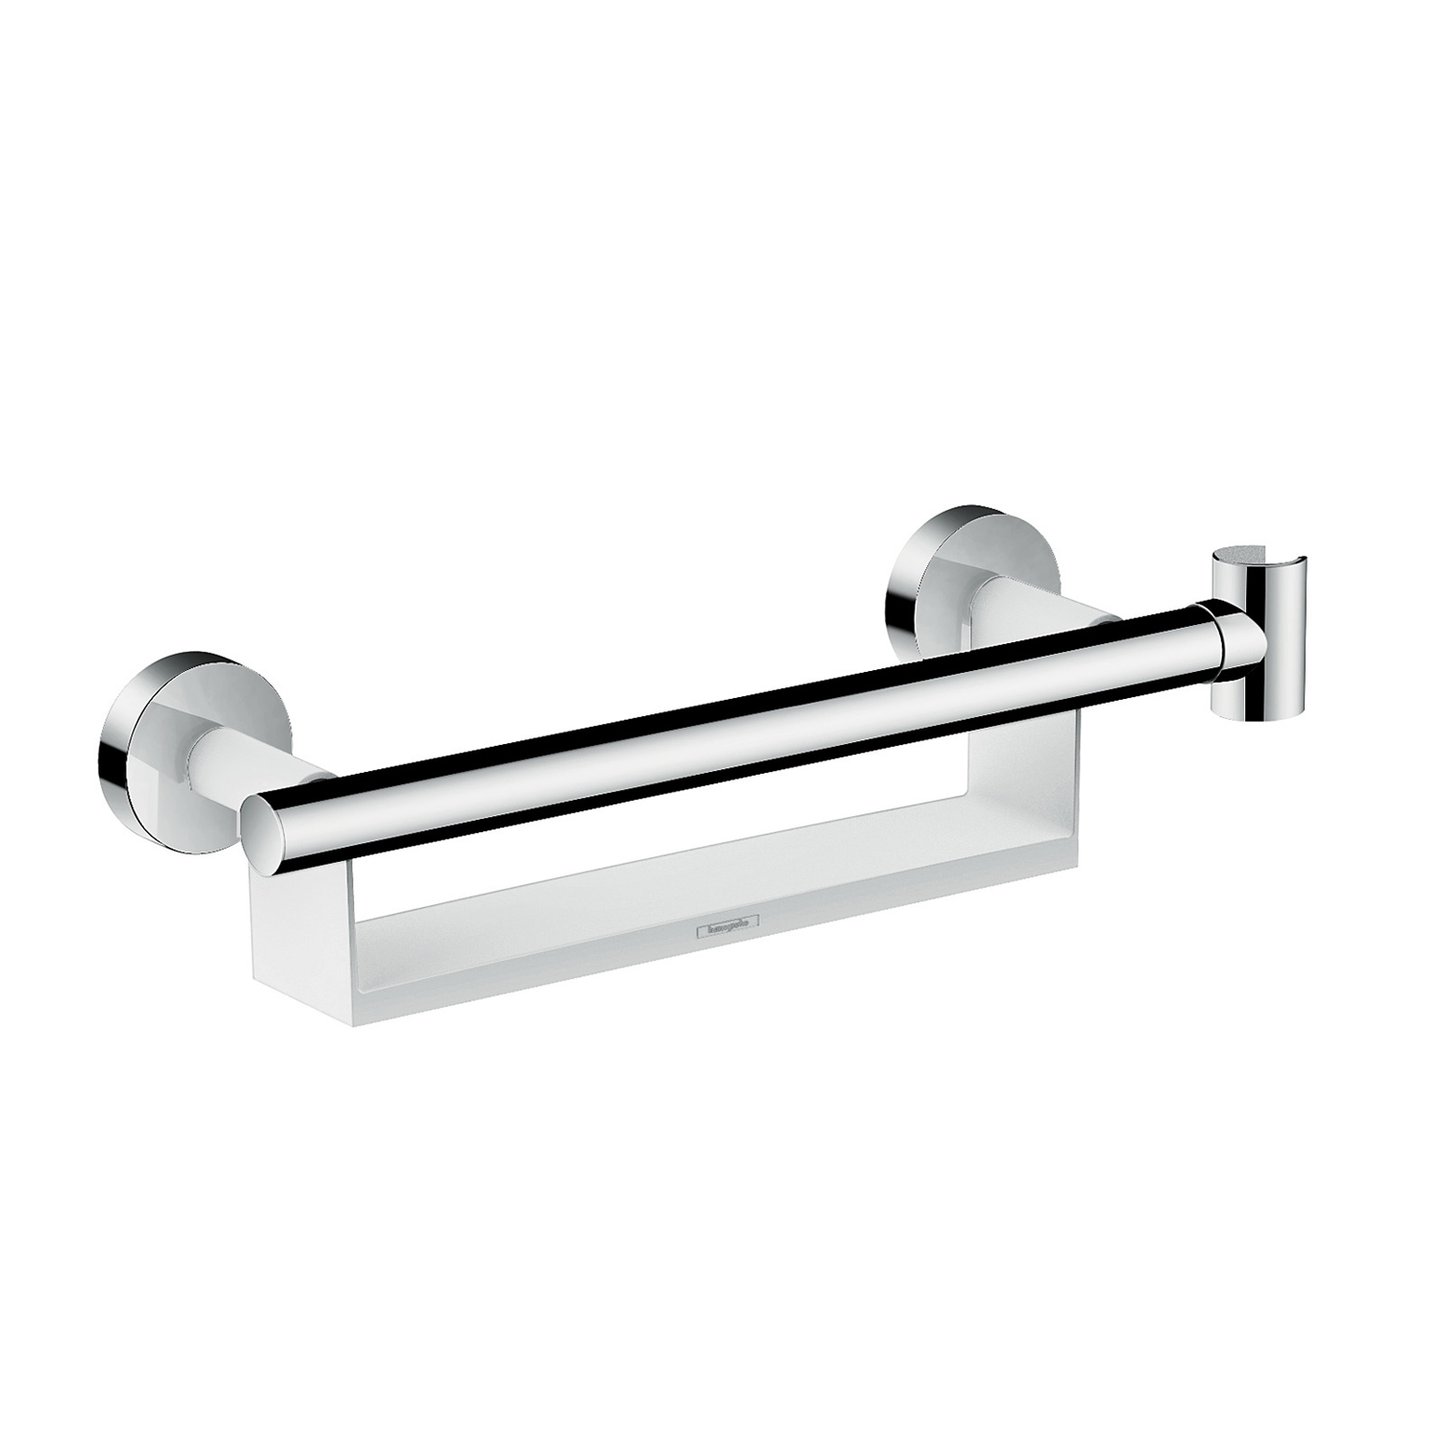 Hansgrohe Comfort grab rail with shelf and shower bracket white/chrome - 26328400 | REUTER